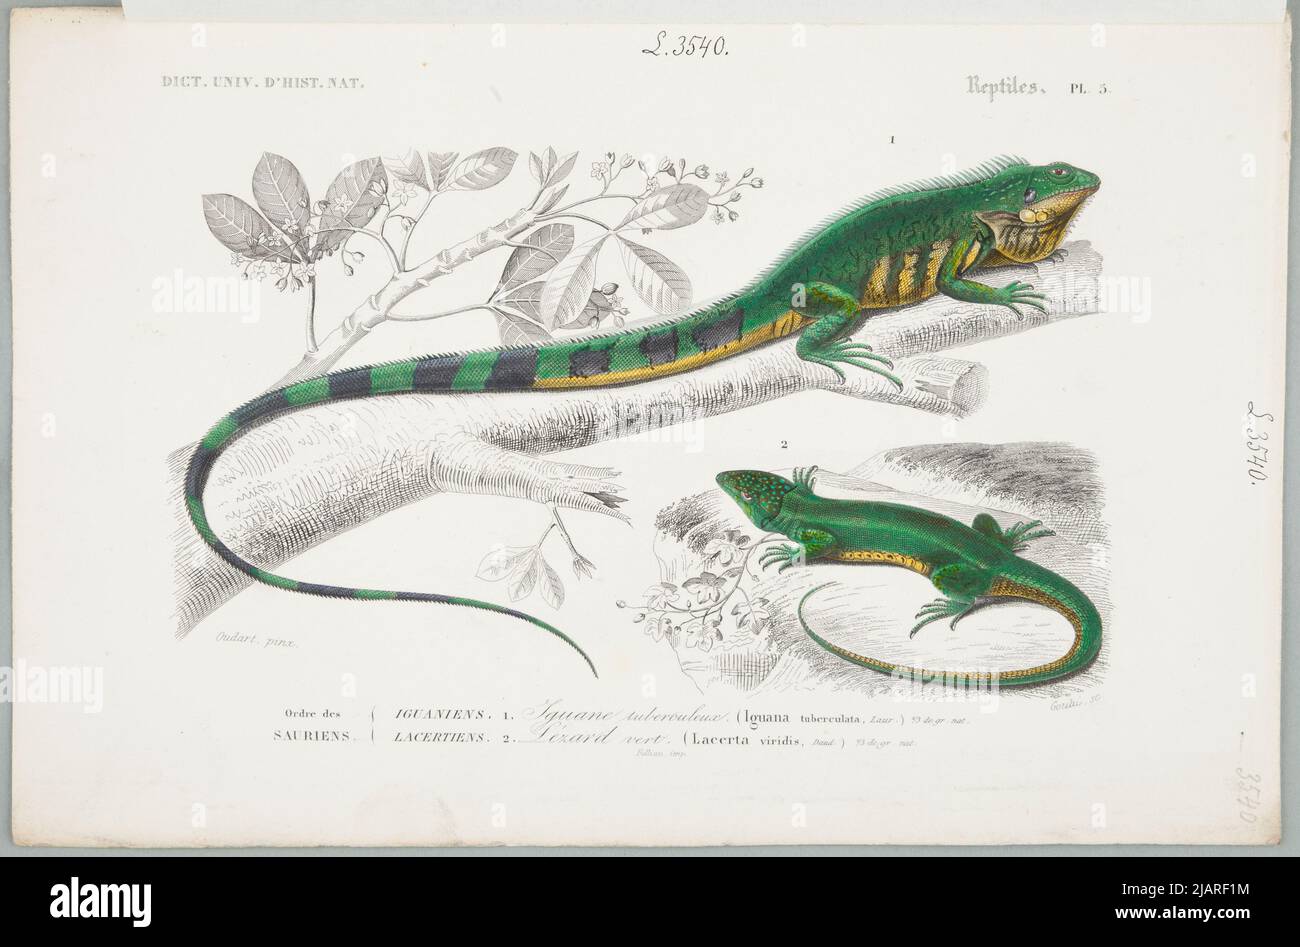 Reptiles pl.5. Plansza comes from the Universal Dictionary of Natural History Summarizing and Completing All the Facts Presented by the Encyclopedias, /. In a collection of boards from various albums of natural history Goutu, Oudart, Paul Louis (1796 1860), Folliau Imp. Stock Photo